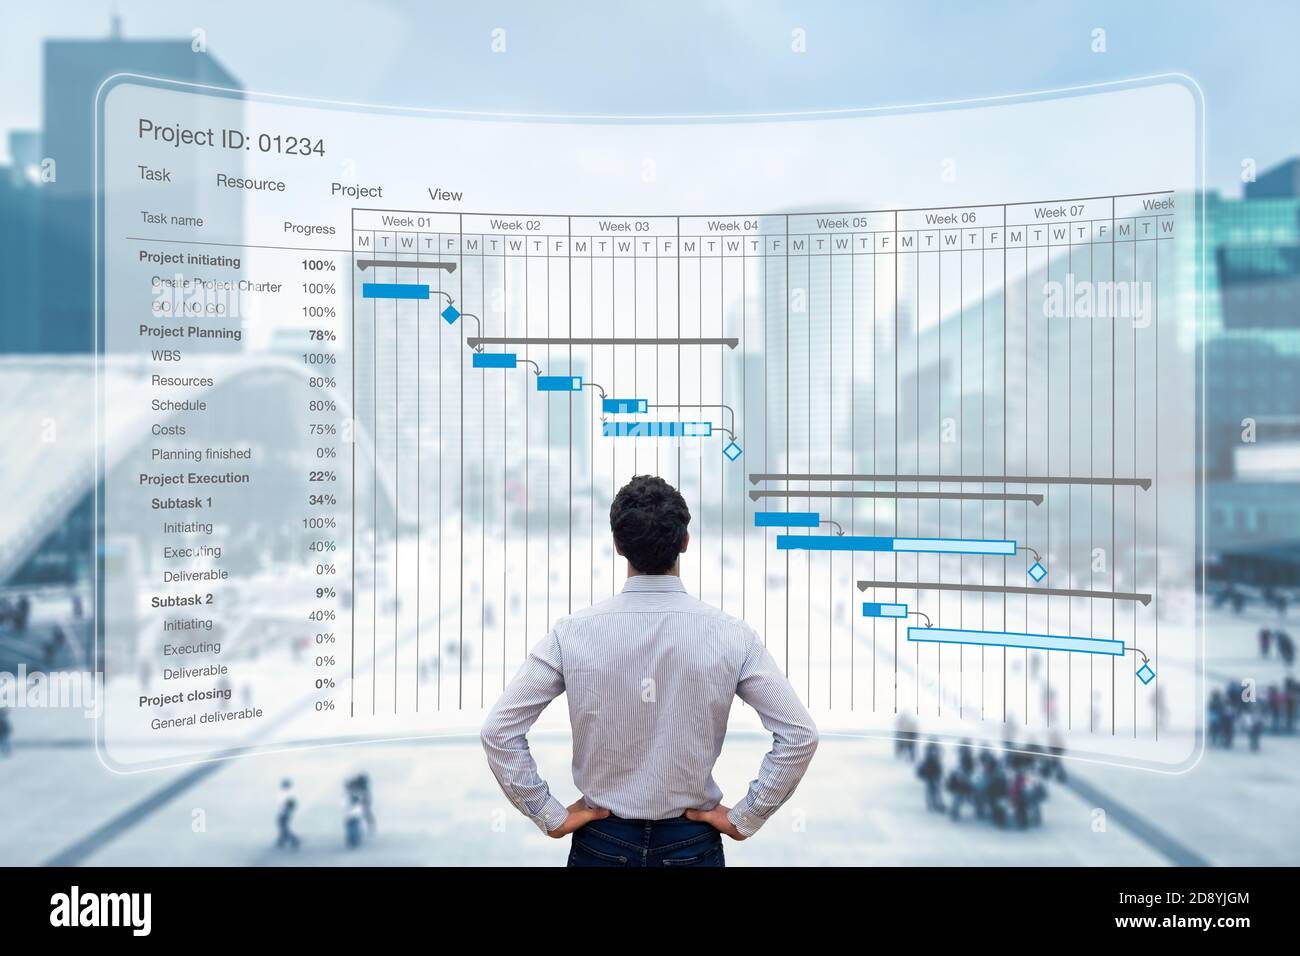 Project manager working with Gantt chart planning schedule, tracking milestones and deliverables and updating tasks progress, scheduling and managemen Stock Photo